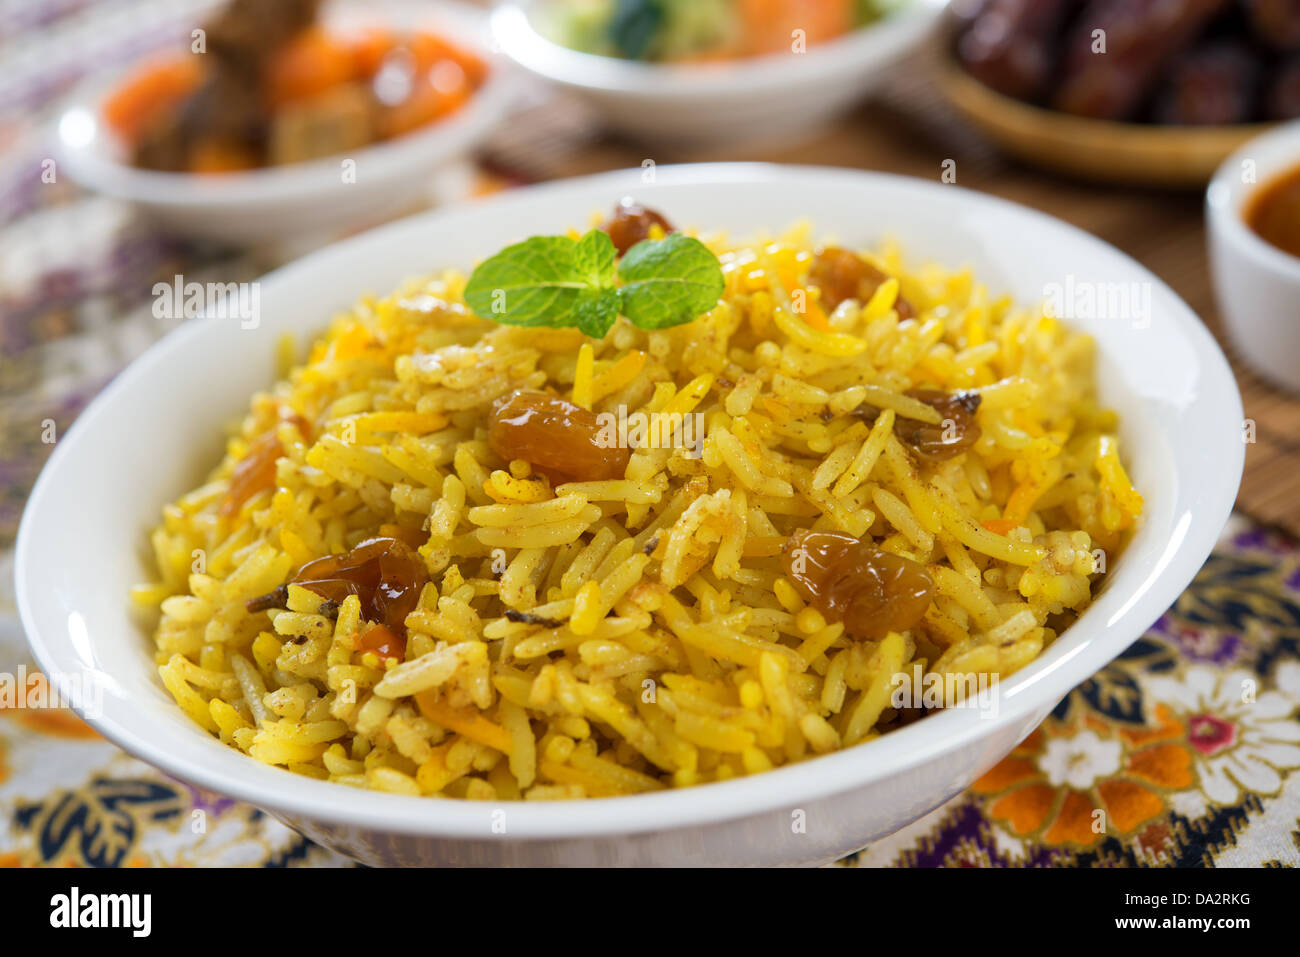 Arabic rice, Ramadan food in middle east usually served with tandoor lamb. Middle eastern food. Stock Photo